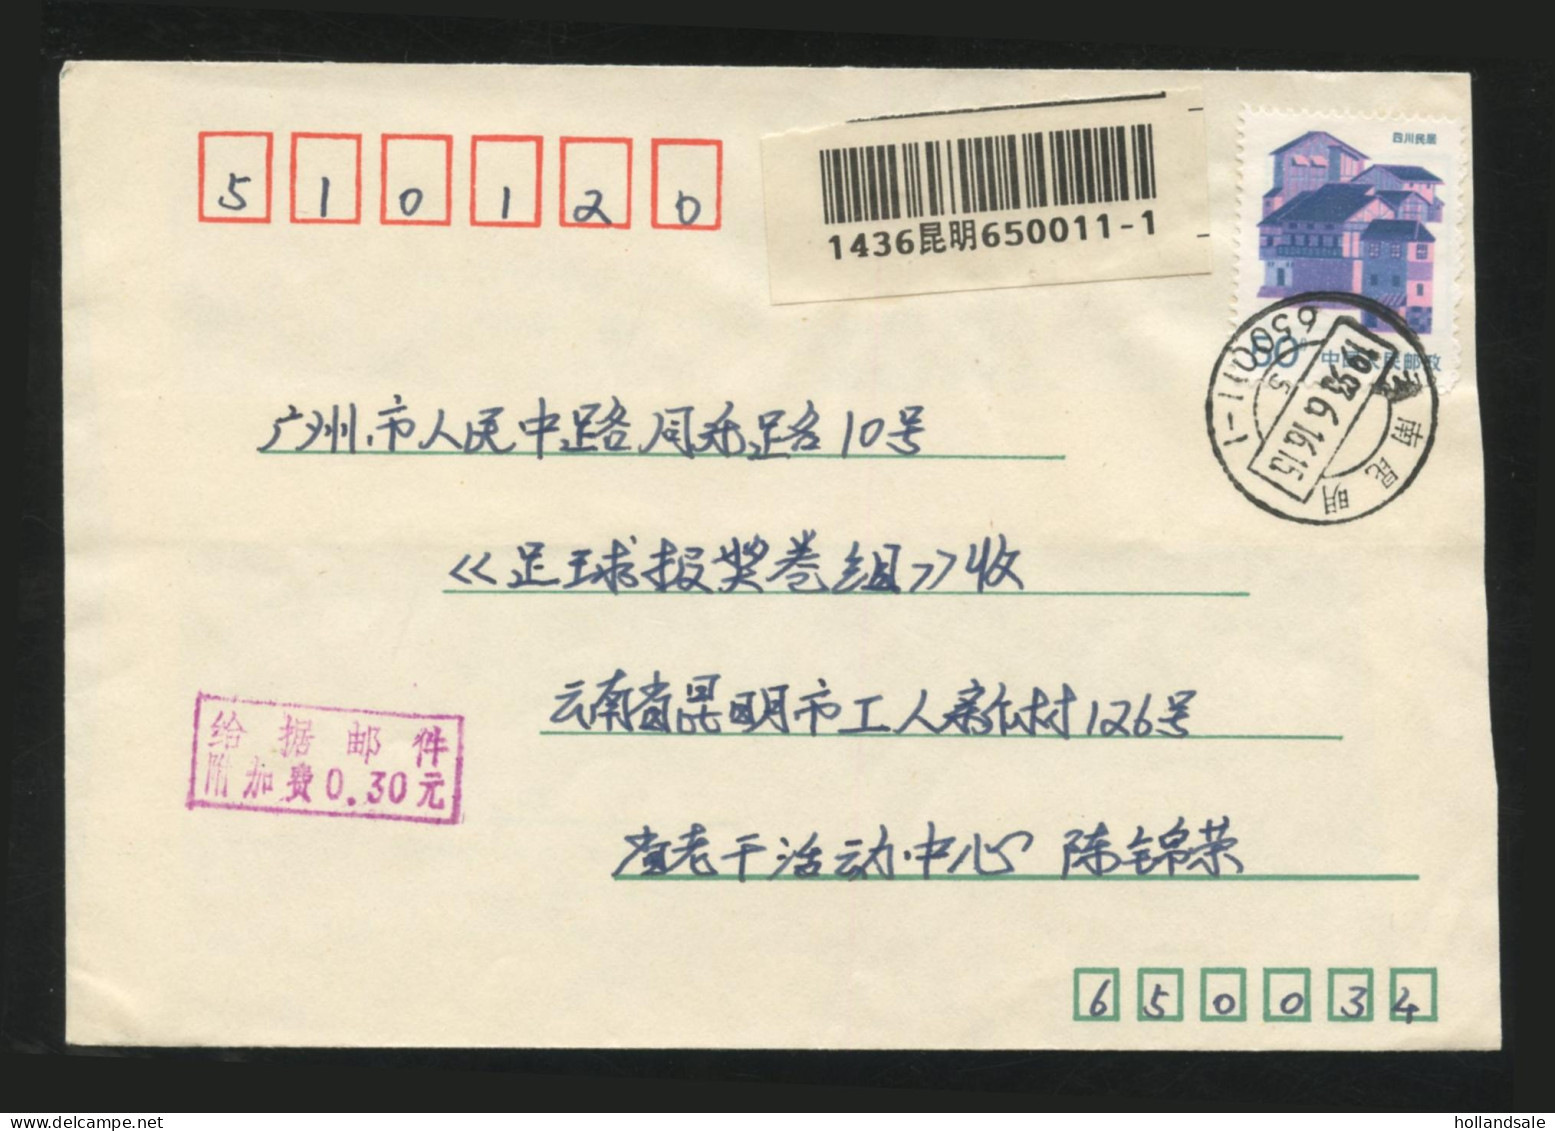 CHINA PRC / ADDED CHARGE - Cover Sent From Kunming To Guangzhou. Violet 30f AC Chop. - Postage Due